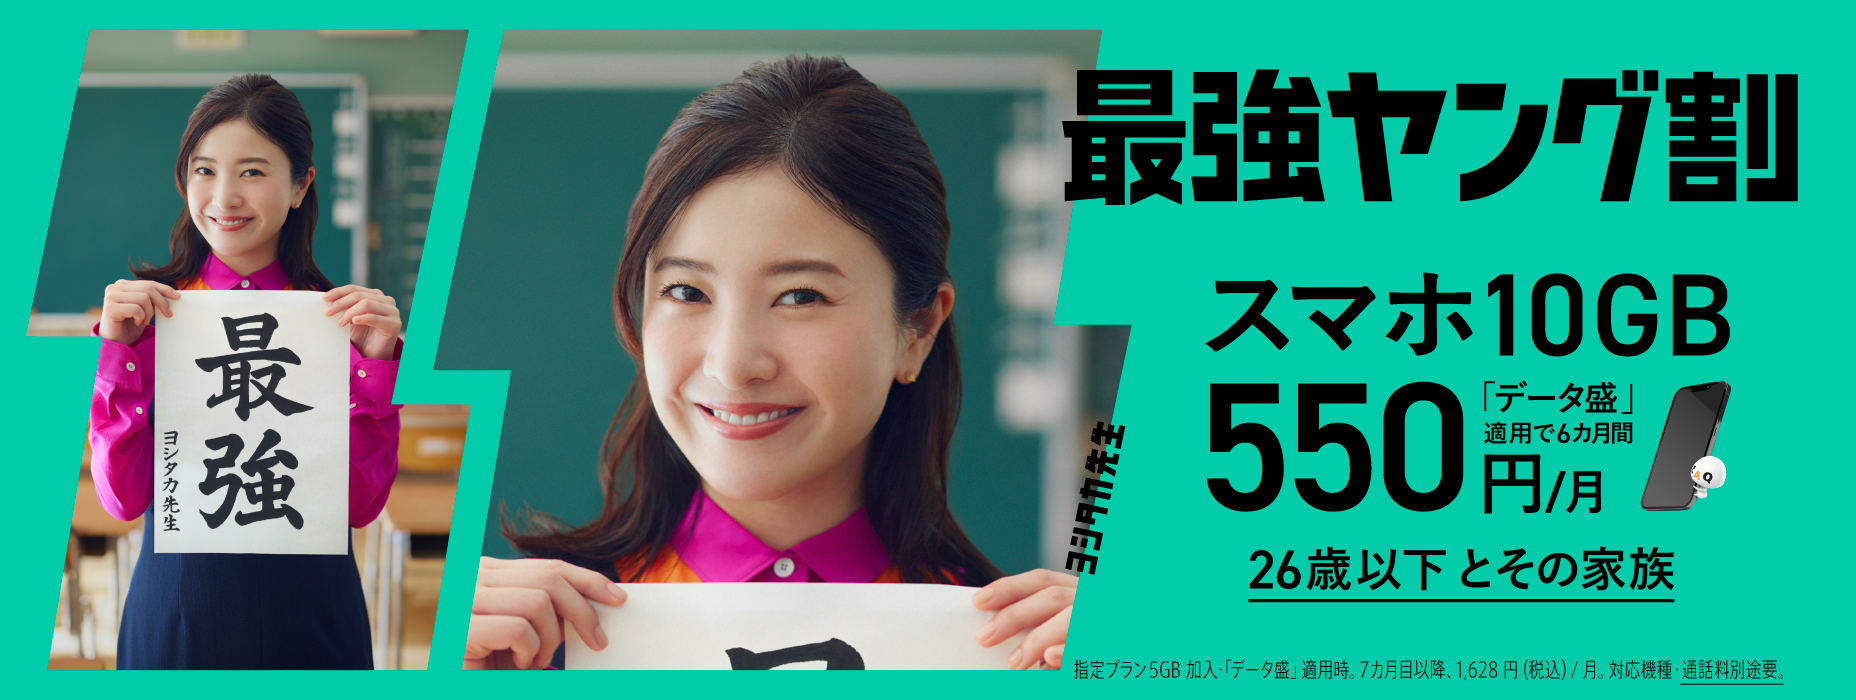 J:COM MOBILE Saikyo Young Wari 10GB 550 yen/month For under 26 years old and their families